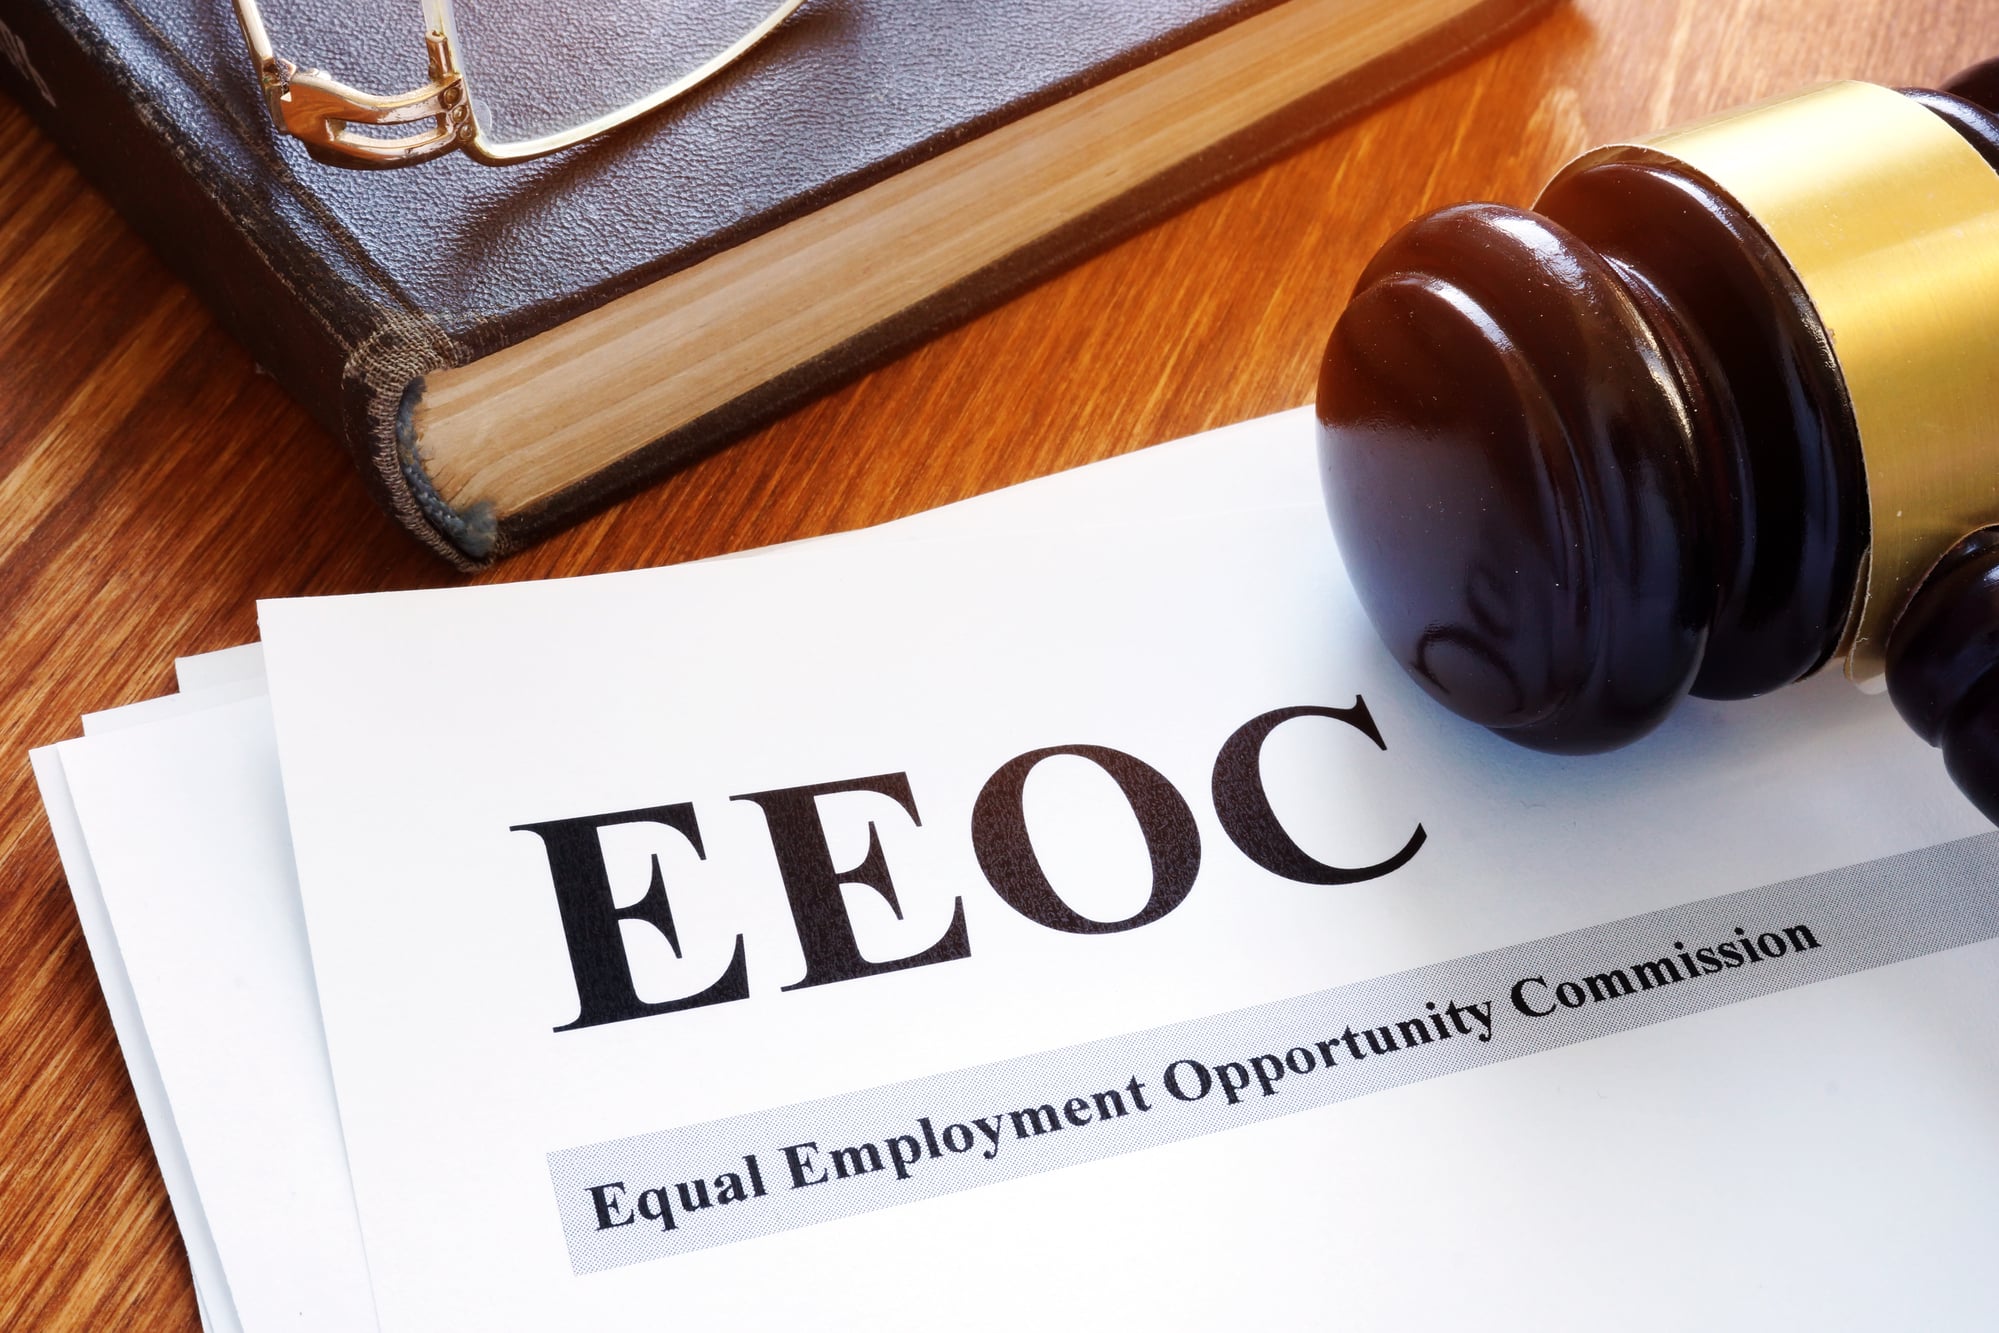 What is the EEOC?